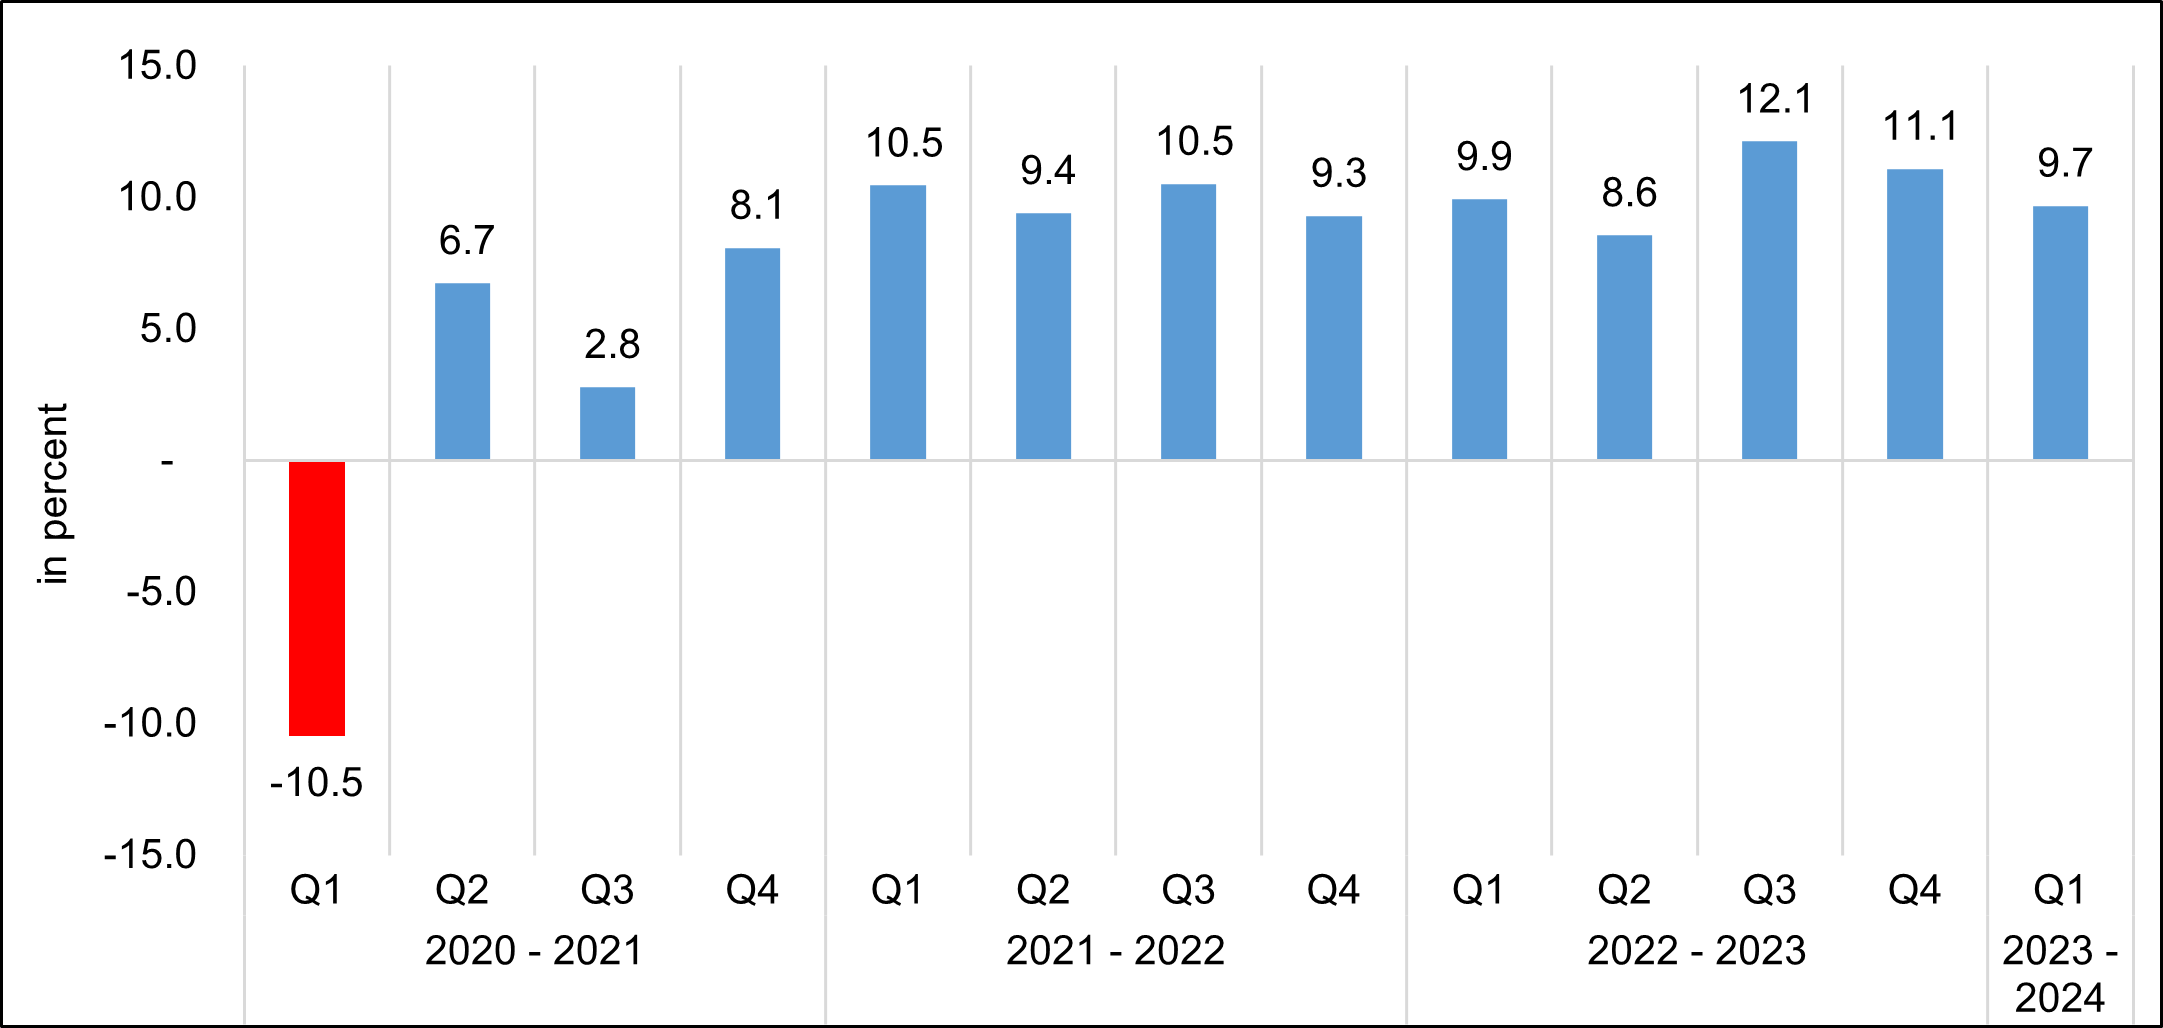 Figure 10. Gross National Income, Q1 2021 to Q1 2024 Growth Rates,  At Constant 2018 prices